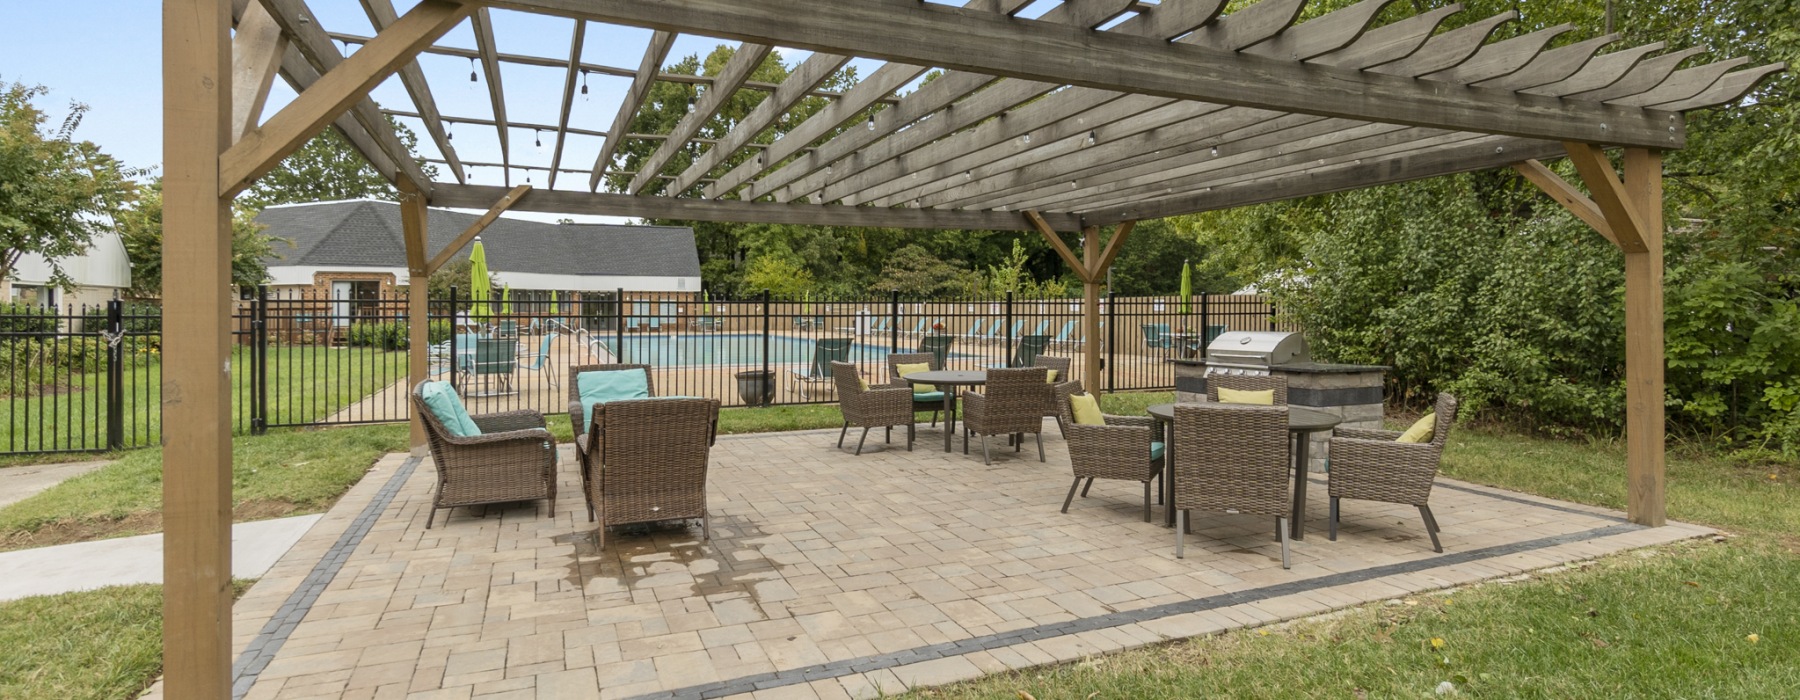 Pergola by the pool with ample seating